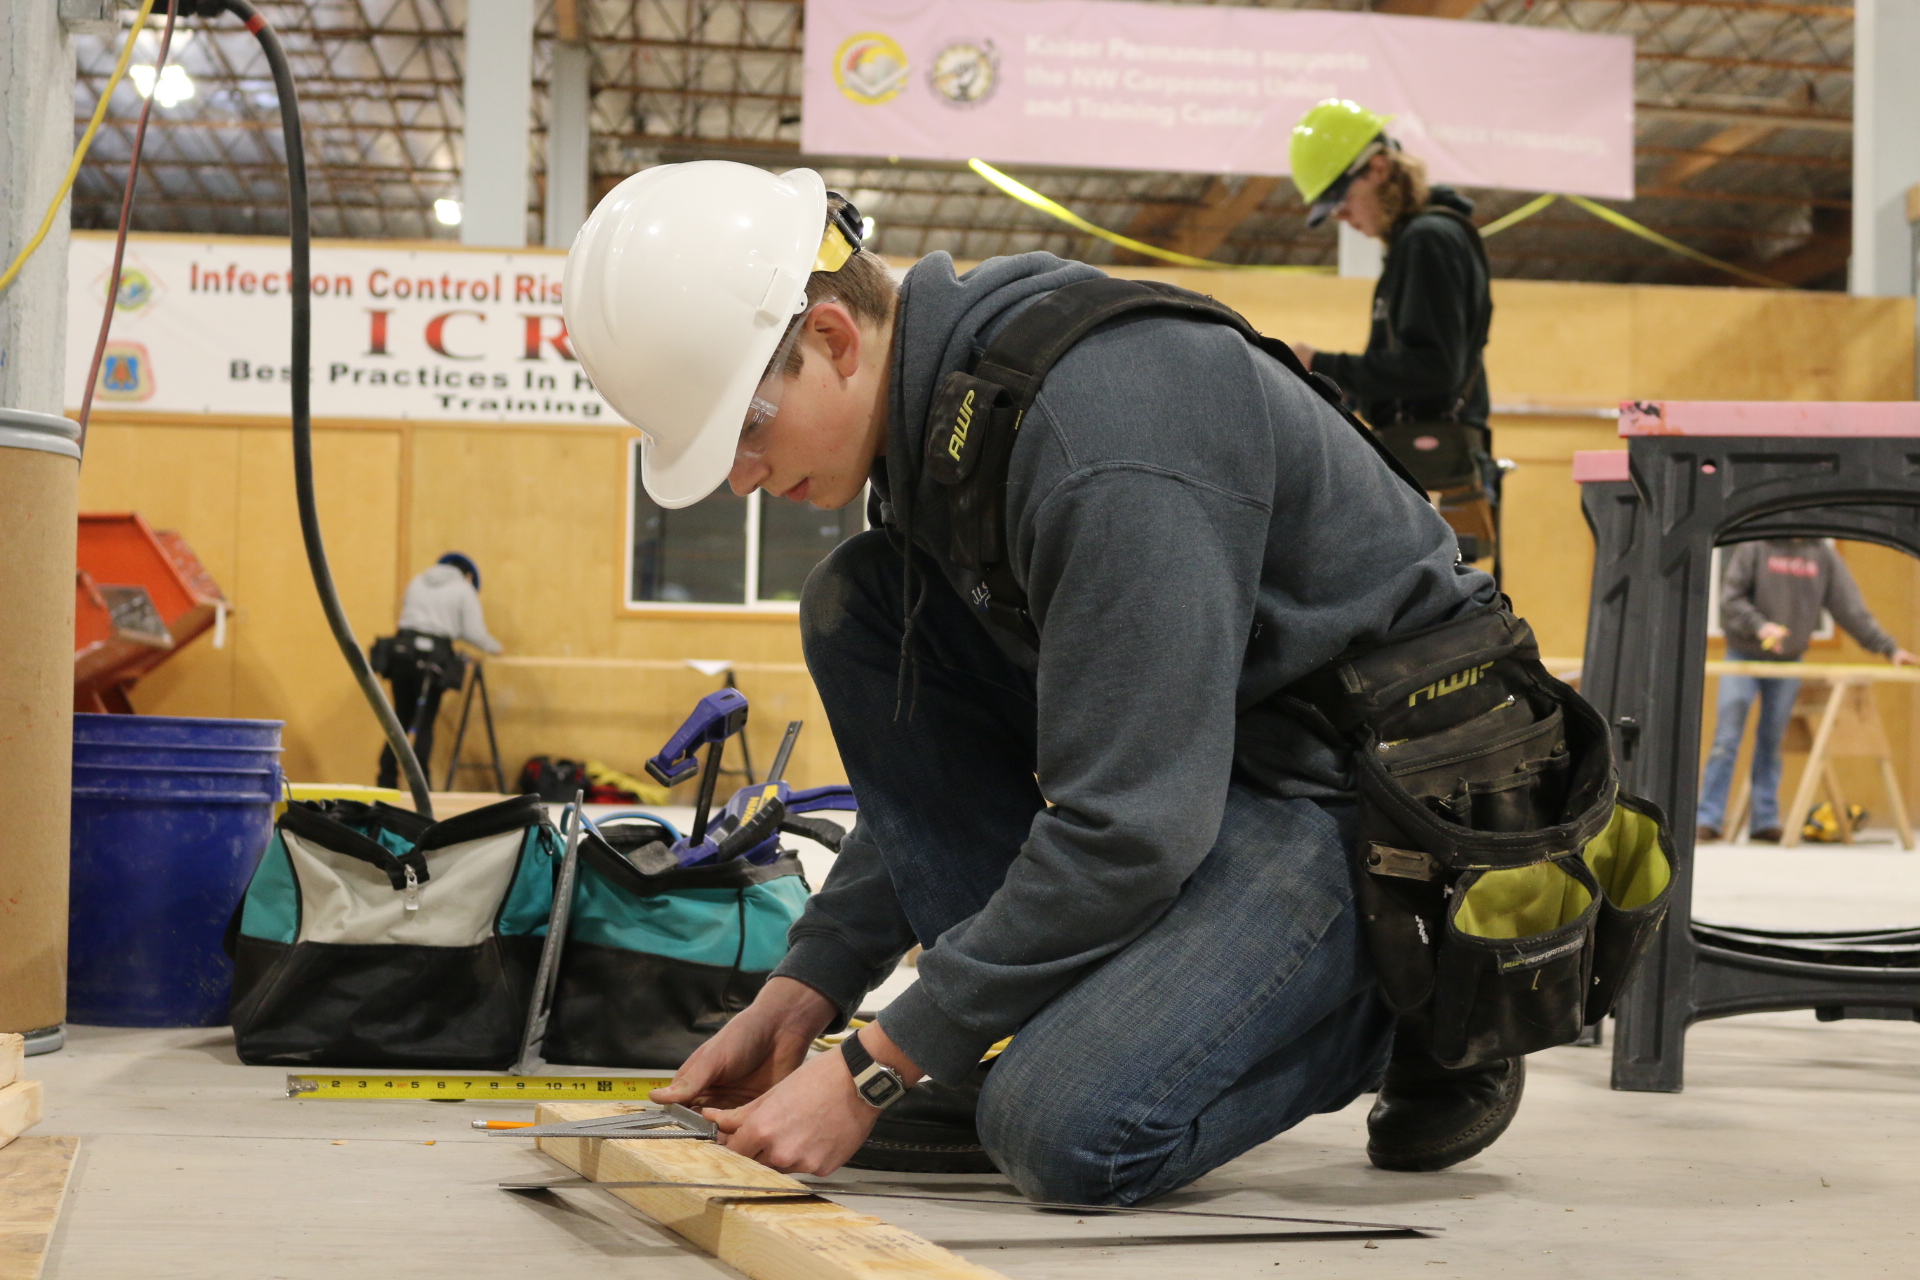 Student uses square to mark 2x4 during construction competition